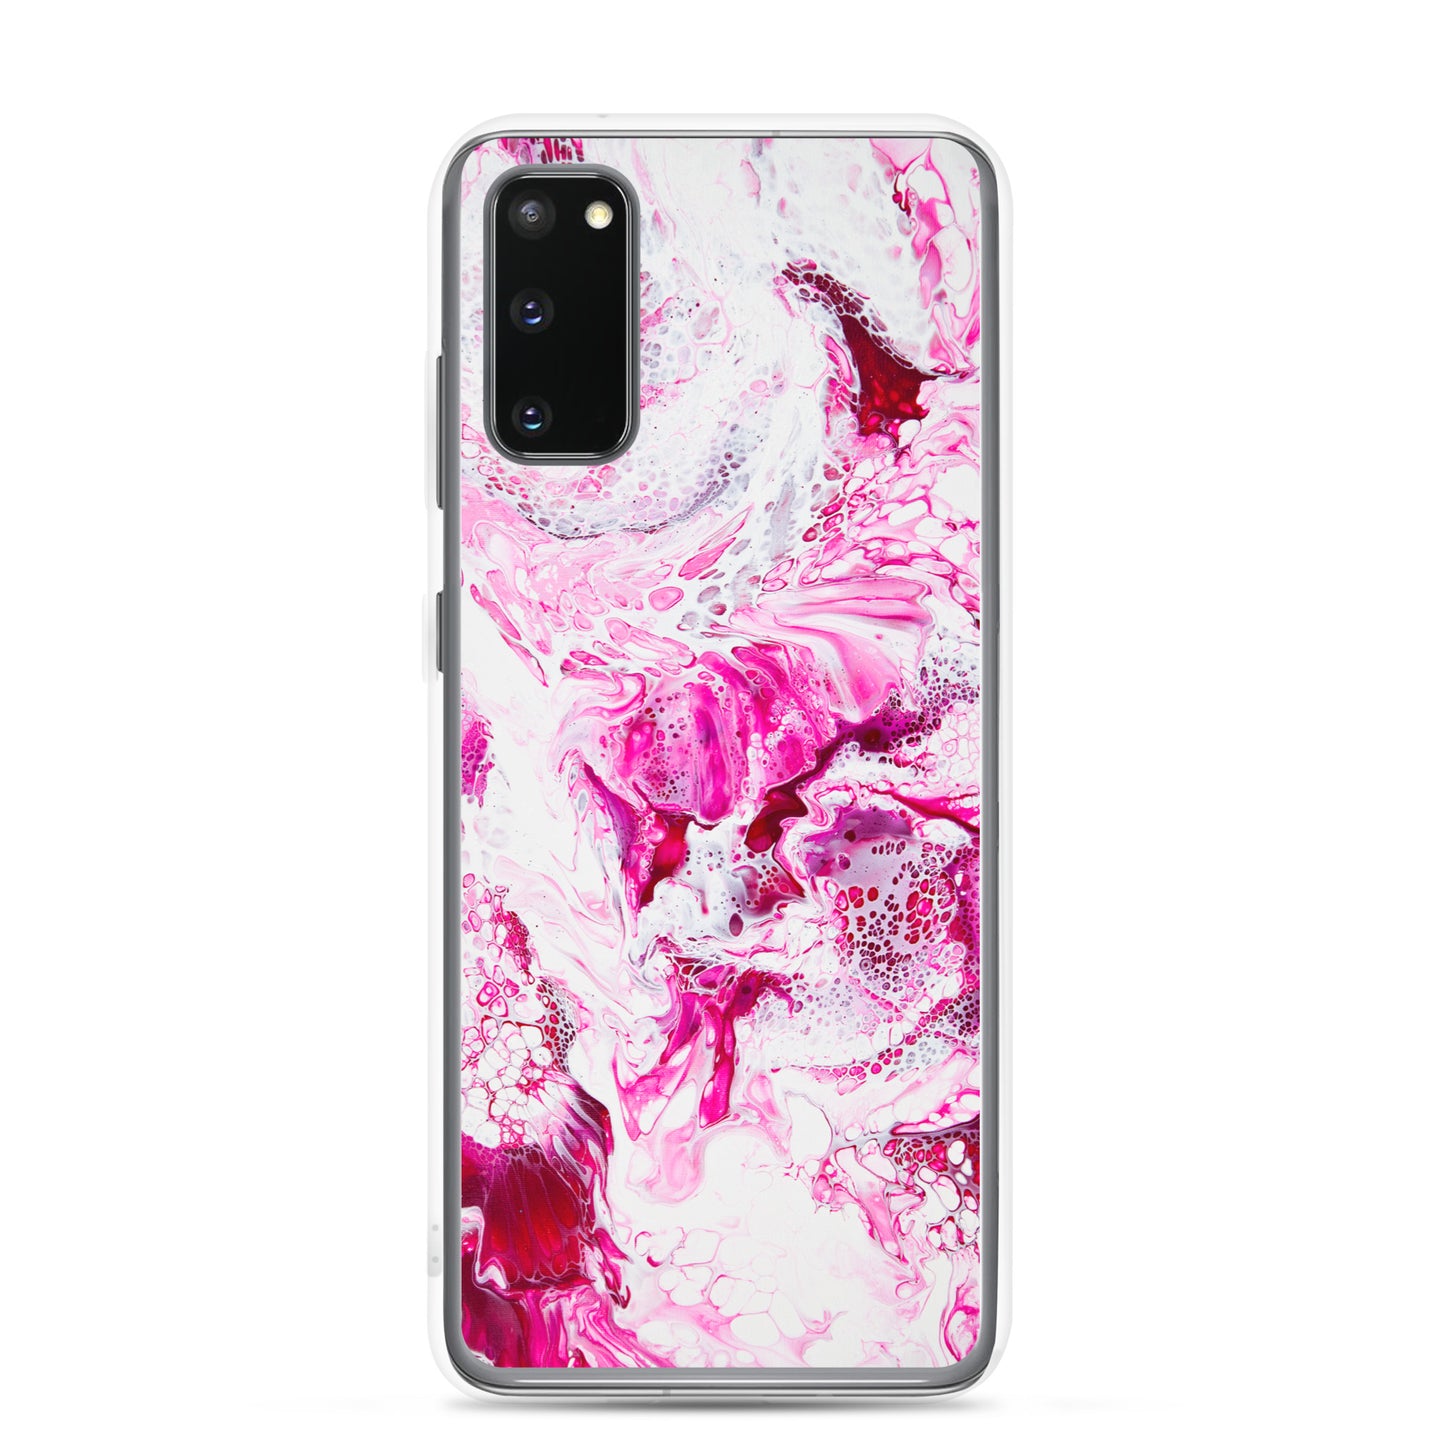 NightOwl Studio Custom Phone Case Compatible with Samsung Galaxy, Slim Cover for Wireless Charging, Drop and Scratch Resistant, Pink Distortion